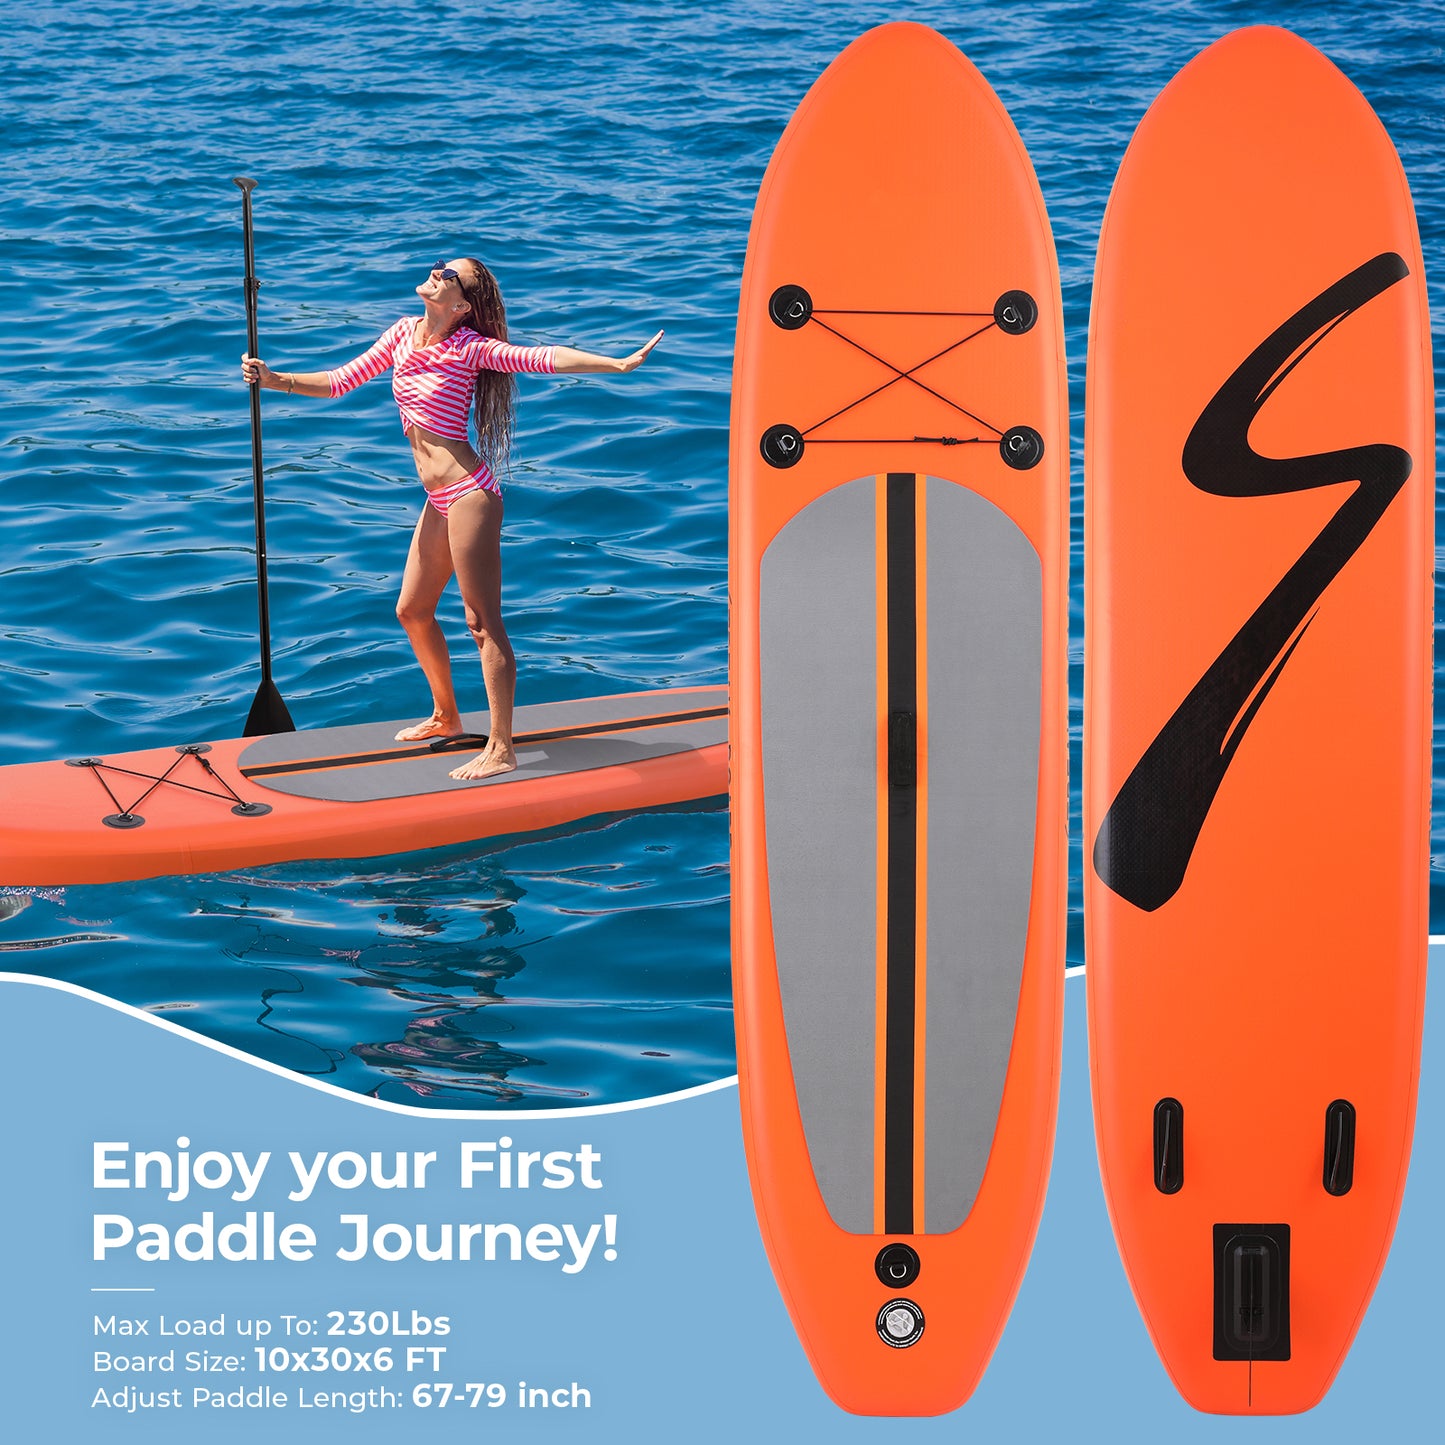 Arlopu 10FT Inflatable Stand Up Paddle Board, 3 Fins Paddleboard with Full SUP Accessories, Hand Pump and Carry Bag